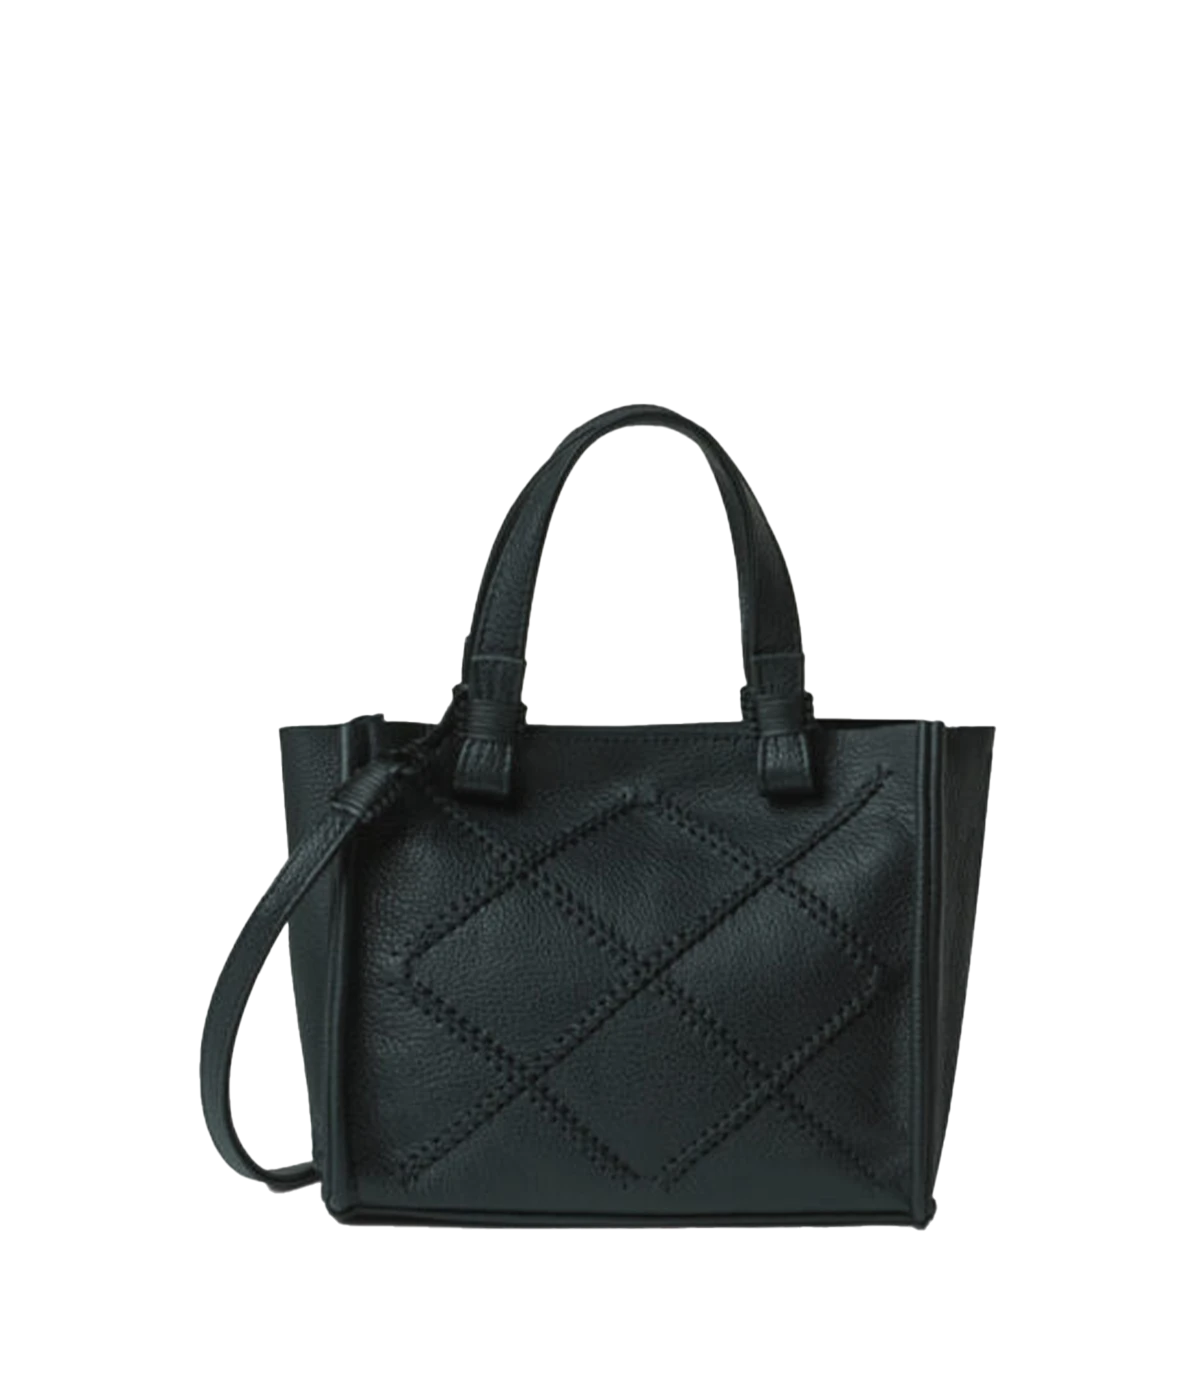  An everyday small tote bag in black, featuring 100% calf leather, two leather handles, macrame detail, decorative handstitching, signature cross-stitching, unlined, internal pocket, zipper and magnetic clasp. Made in Greece, luxury leather, everyday work bag, mum bag throw on and go.